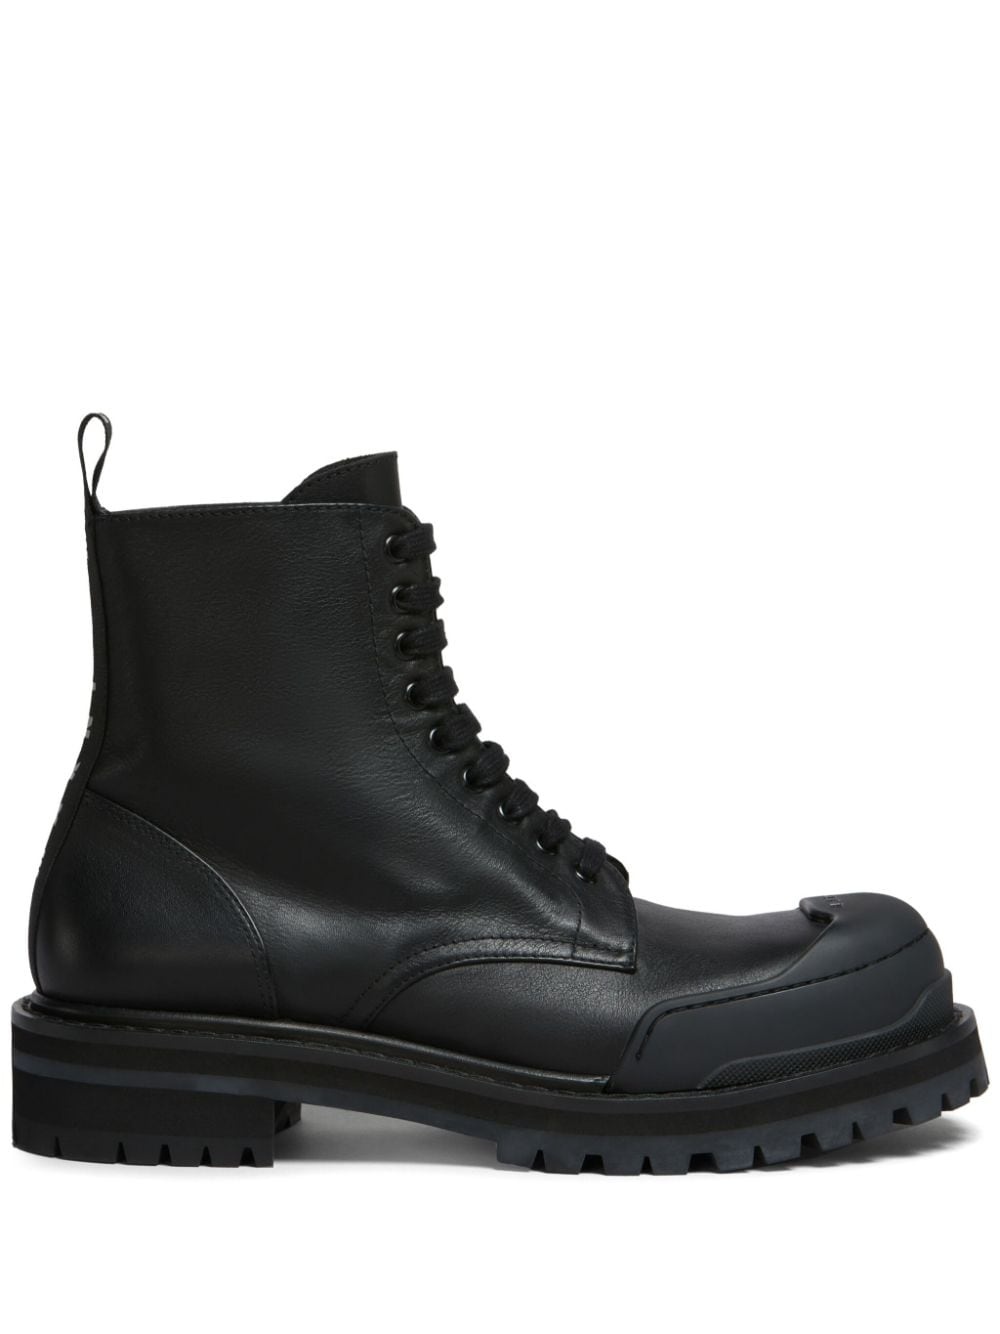 panelled toe combat boots - 1